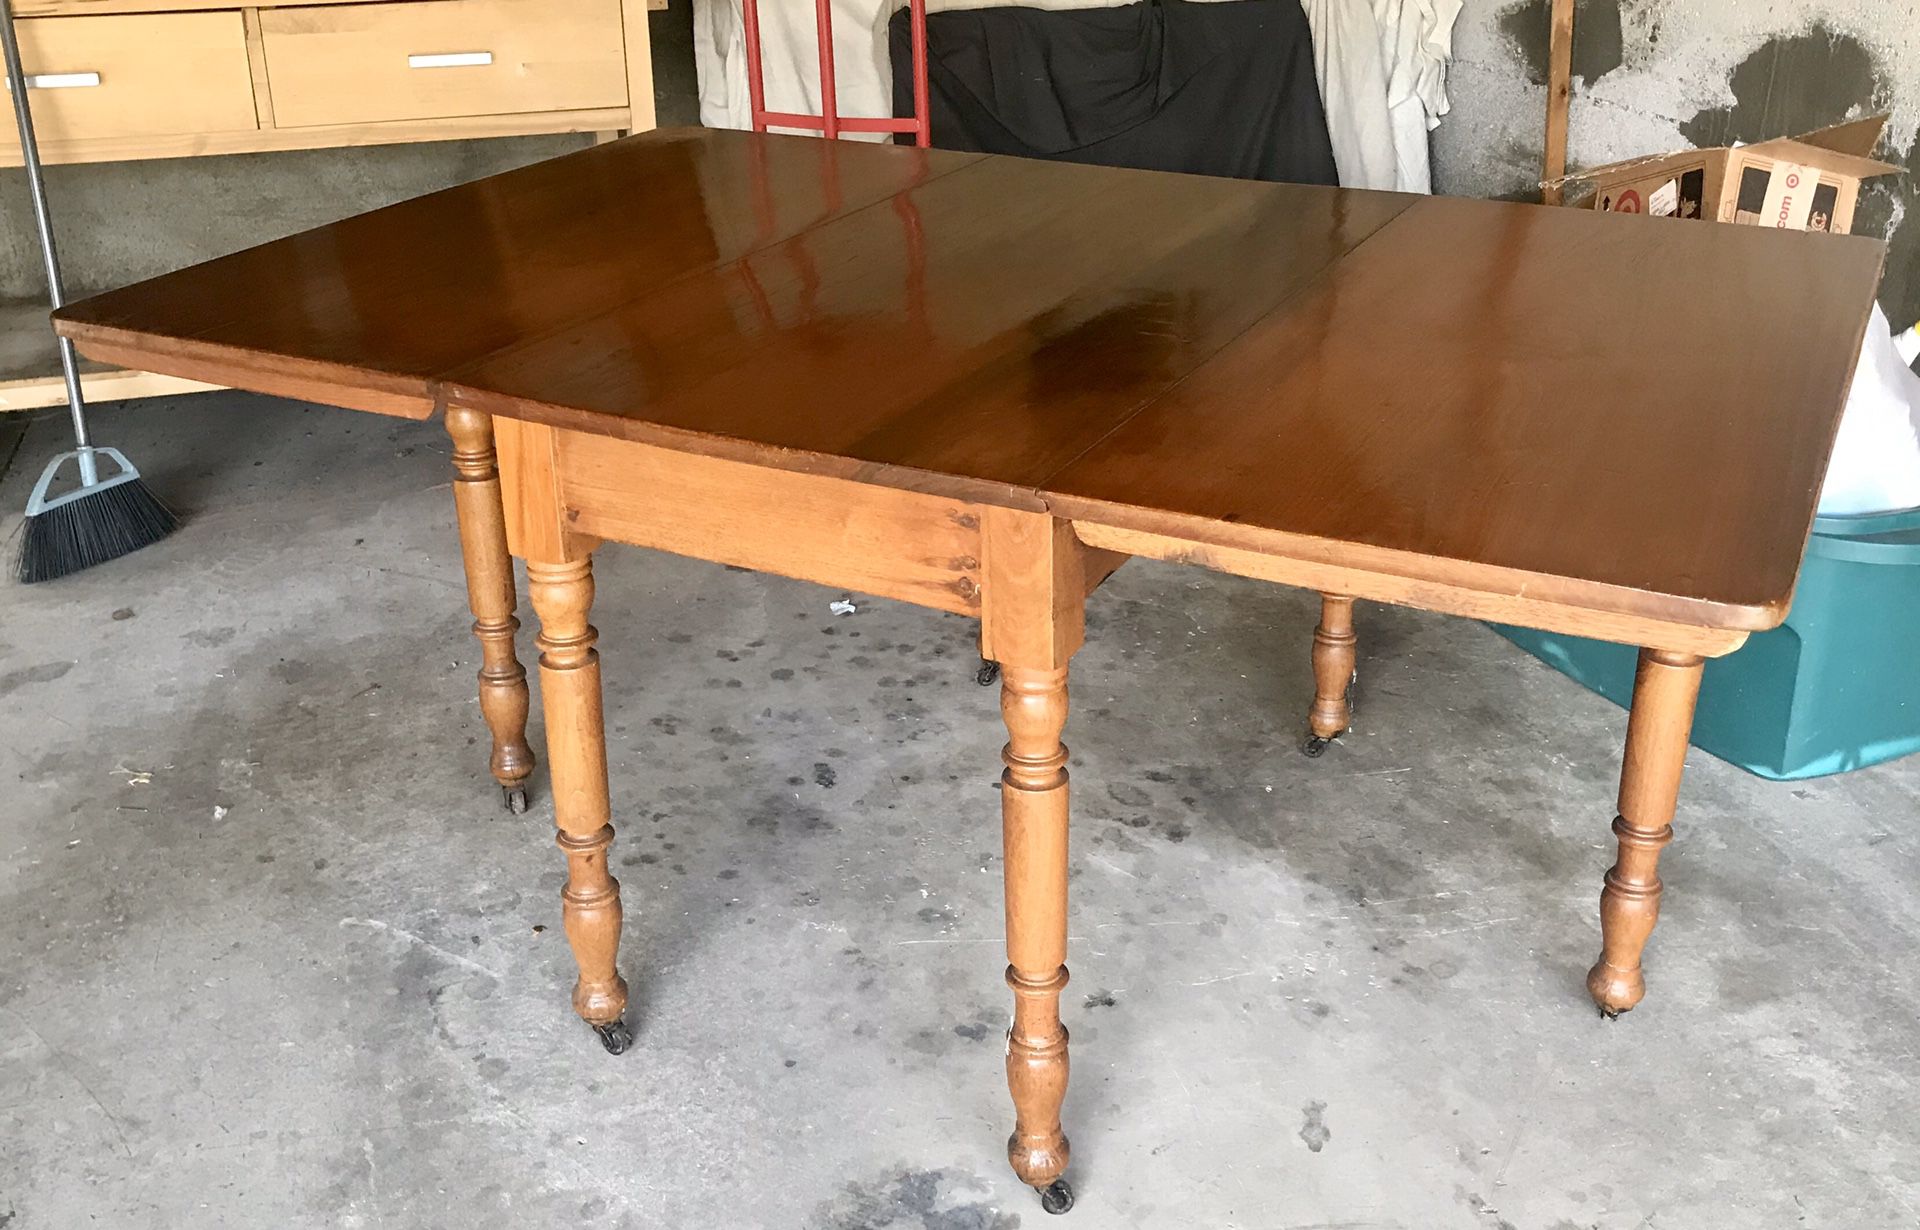 FREE! Gorgeous Dining Table- perfect condition